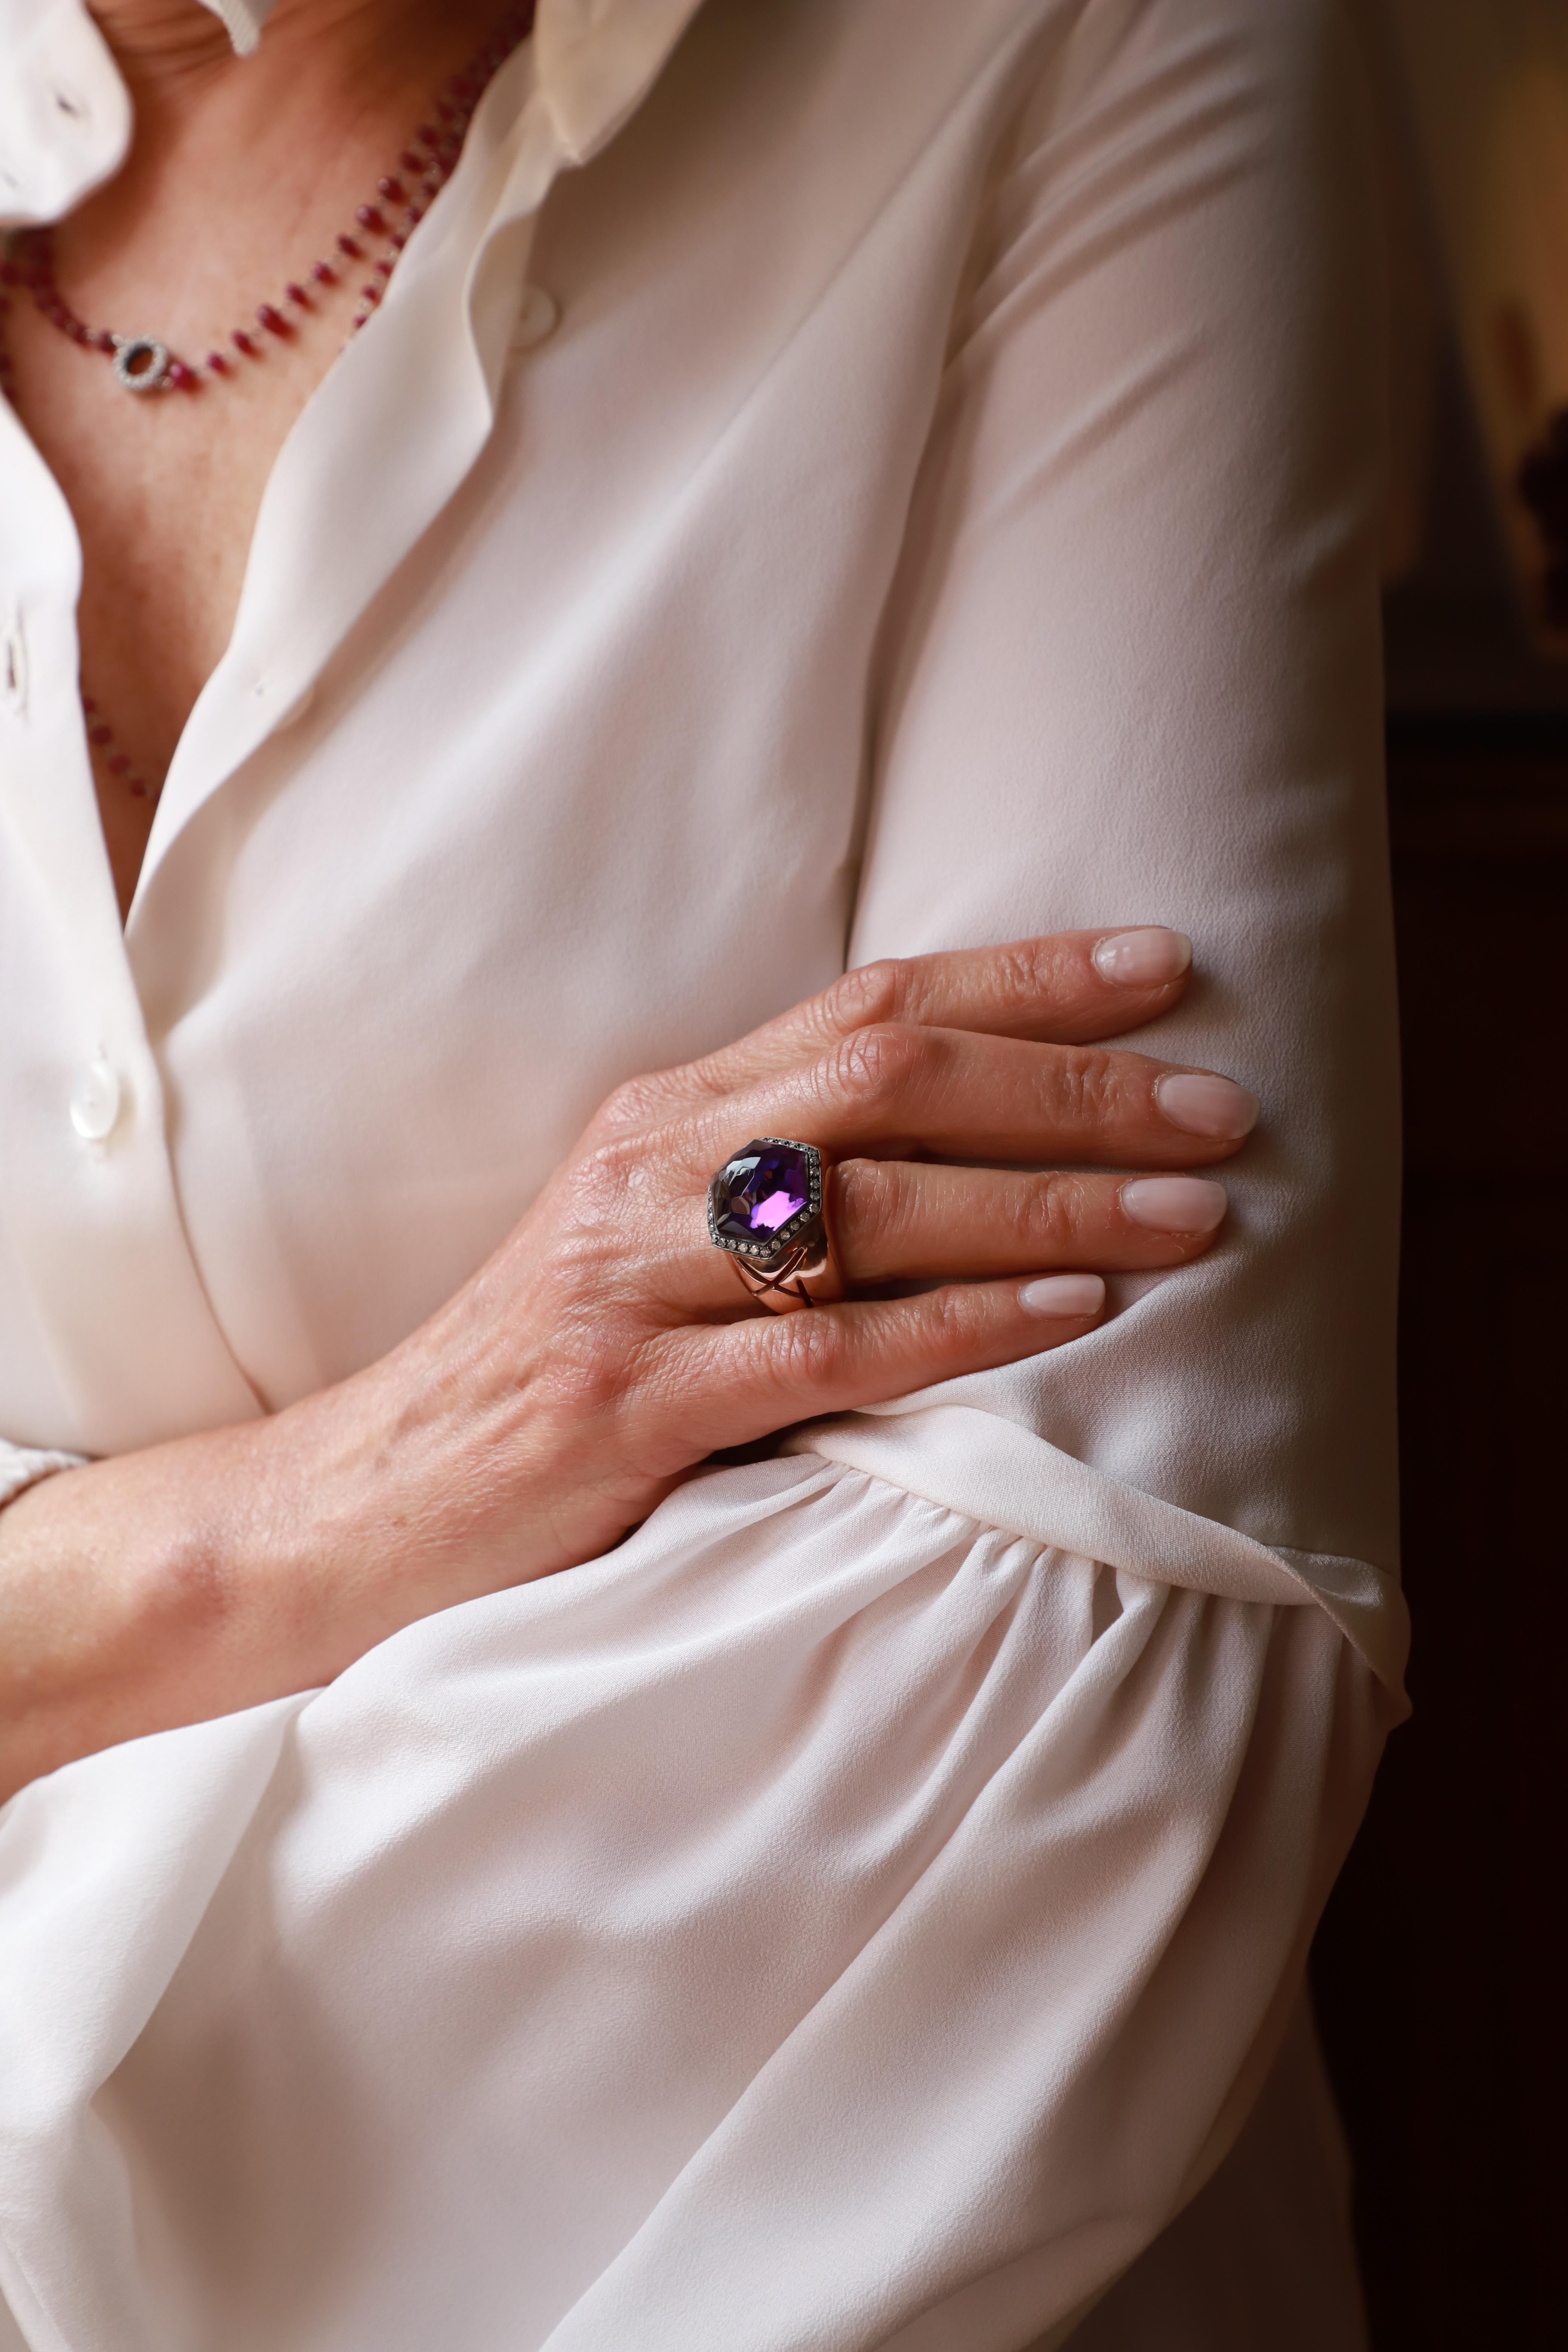 Indulge in the allure of the Rossella Ugolini Hexagonal Amethyst Cocktail Ring, a captivating statement piece handcrafted in 18k rose gold. The heart of the ring boasts a stunning Amethyst hexagonal cupola with a broilet cut, encircled by a graceful